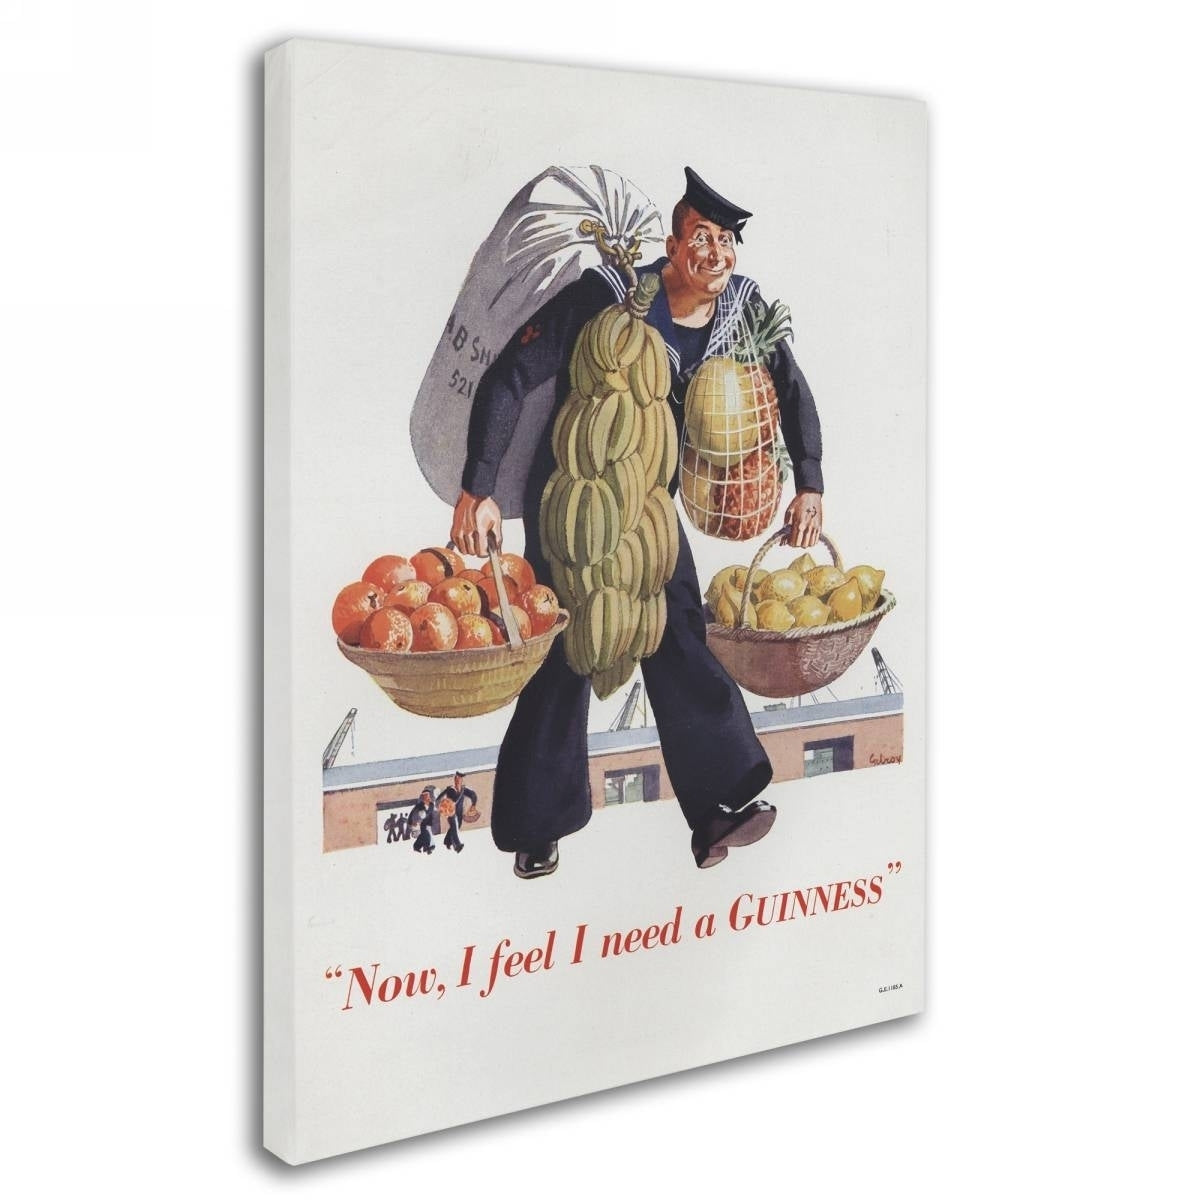 A Guinness Brewery 'Now I Feel I Need A Guinness' Canvas Art with a man carrying fruit and vegetables.